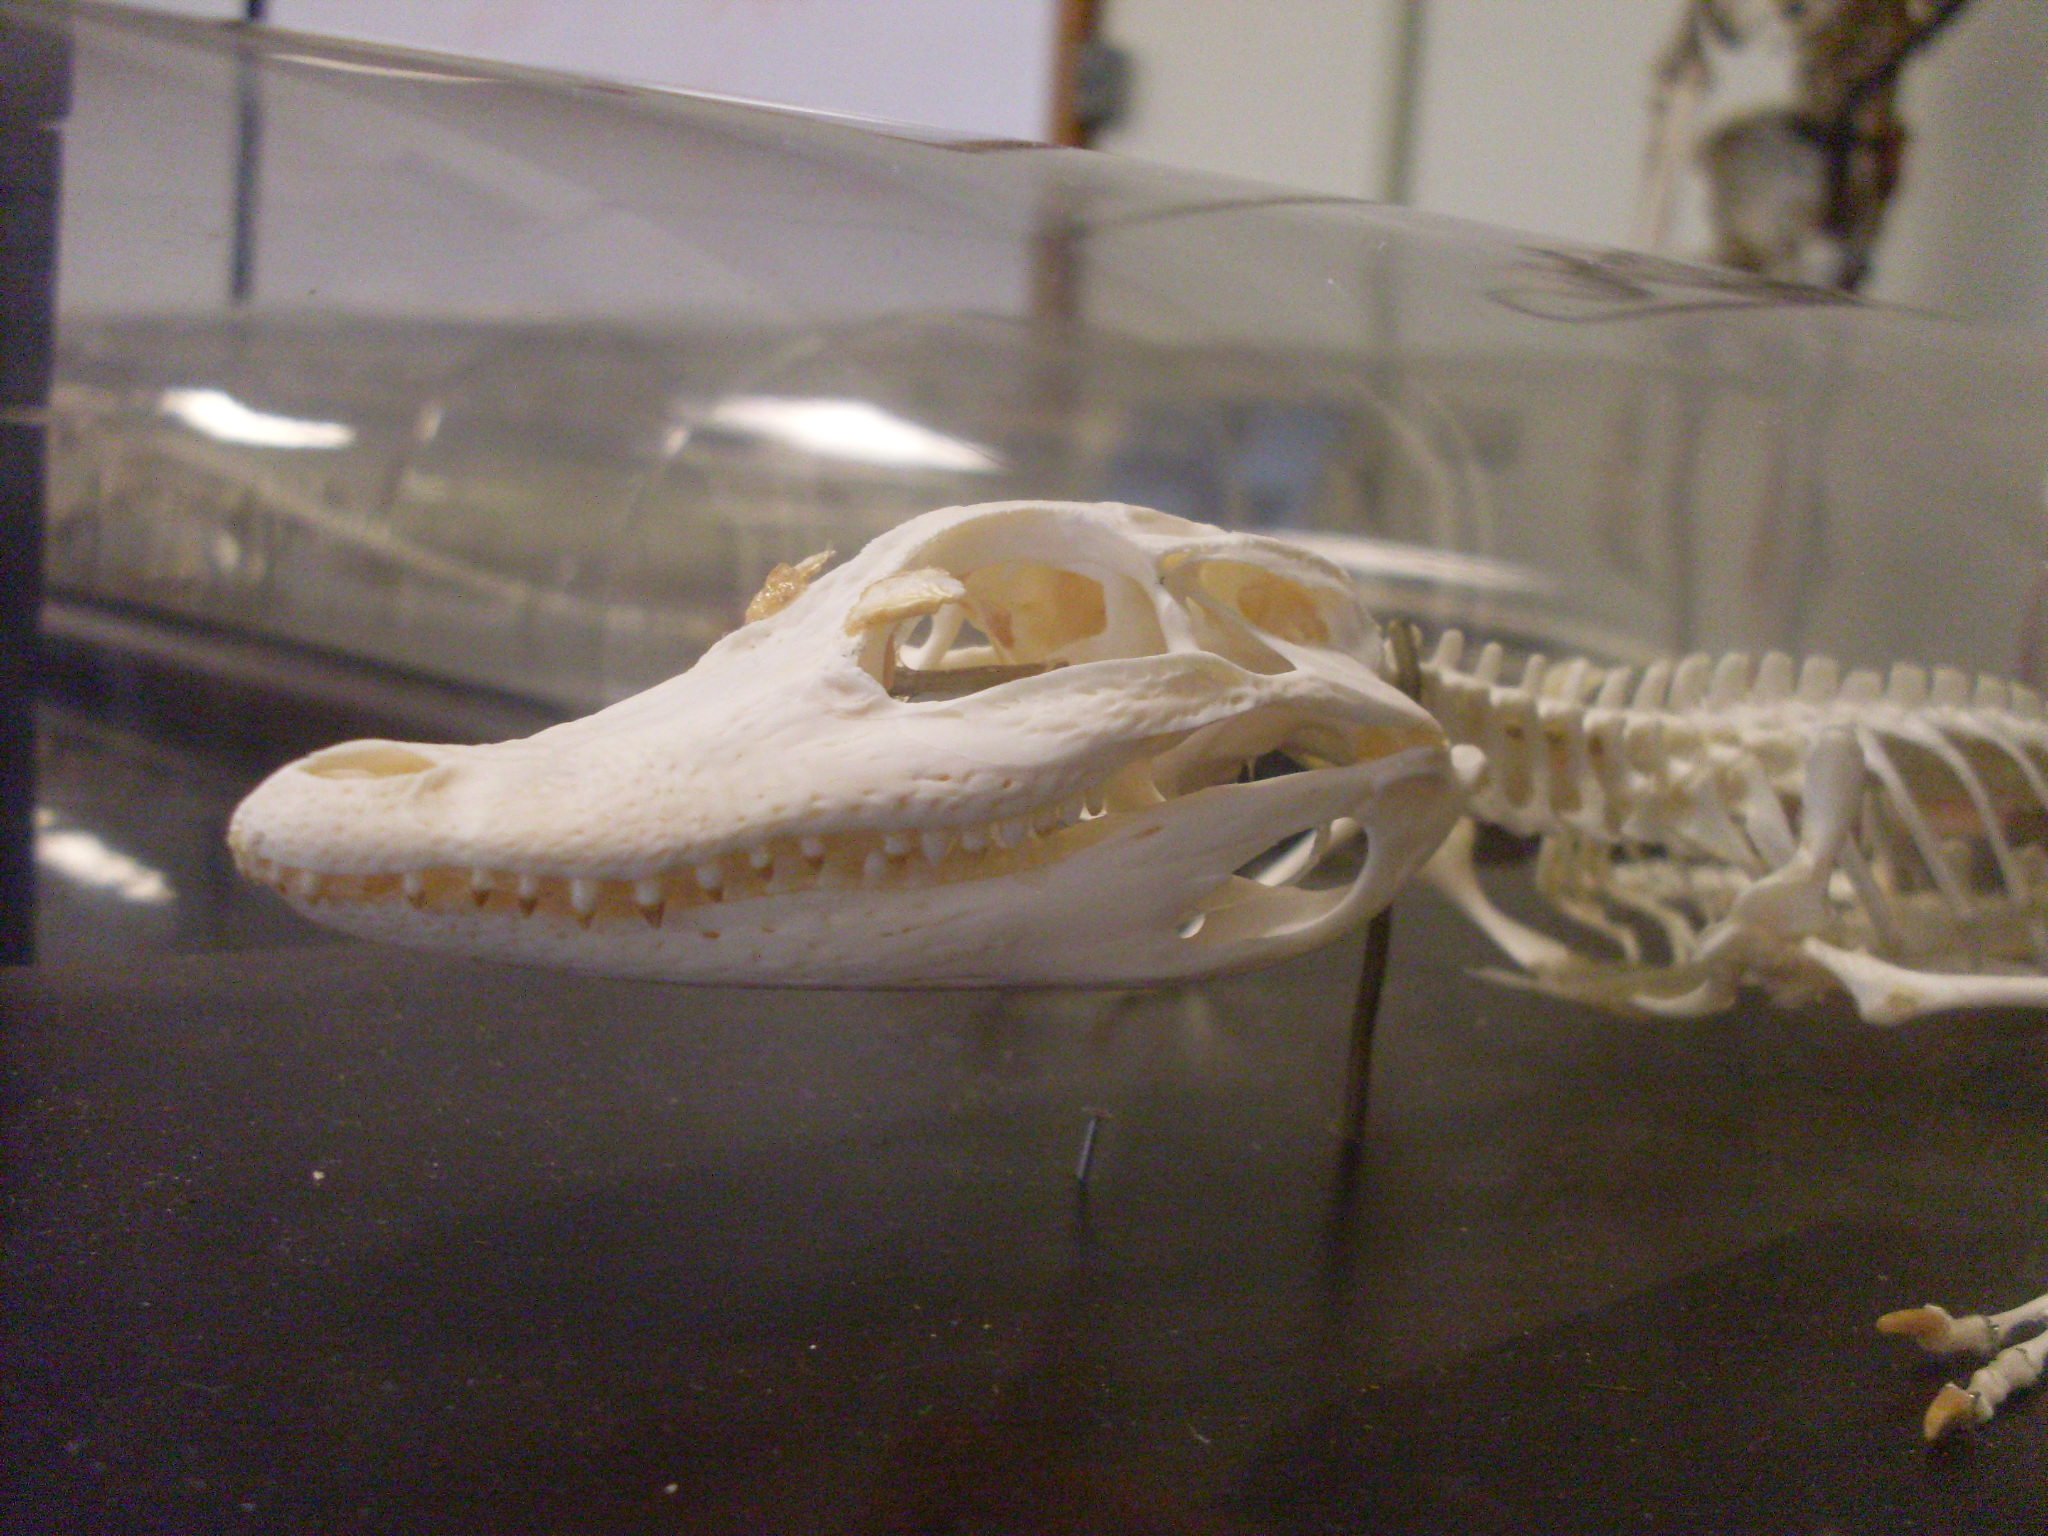 an adult alligator skeleton in a museum display